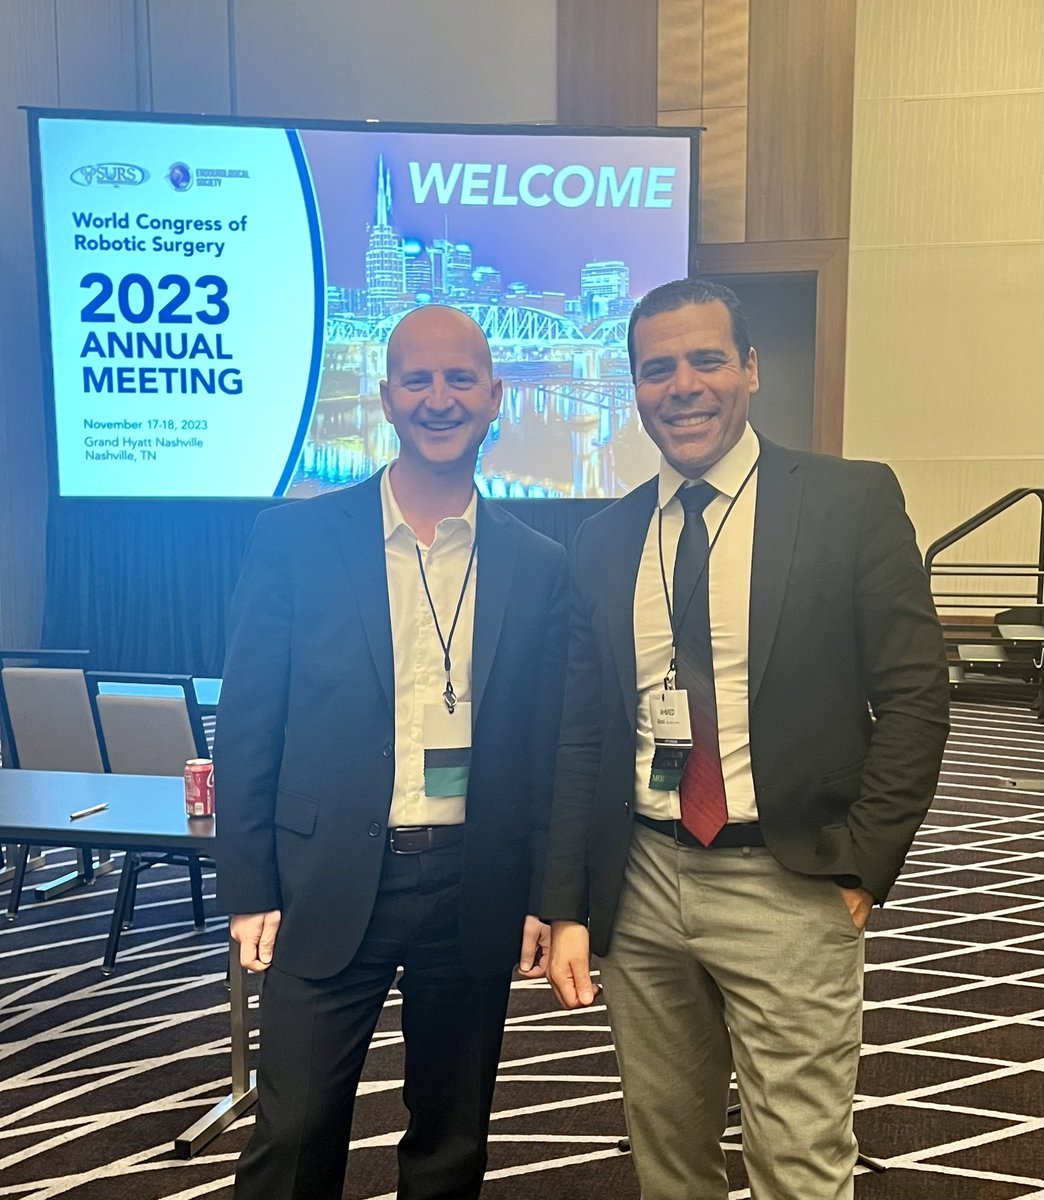 All good things must come to an end . @Endo_Society 2023 Works Congress of Robotic Surgery was a success featuring 4 plenary, 4 concurrent Hands on Sessions & many great discussions. Thx @CraigRogersMD & @aghazimd for organizing as well as faculty,moderators & industry sponsors.